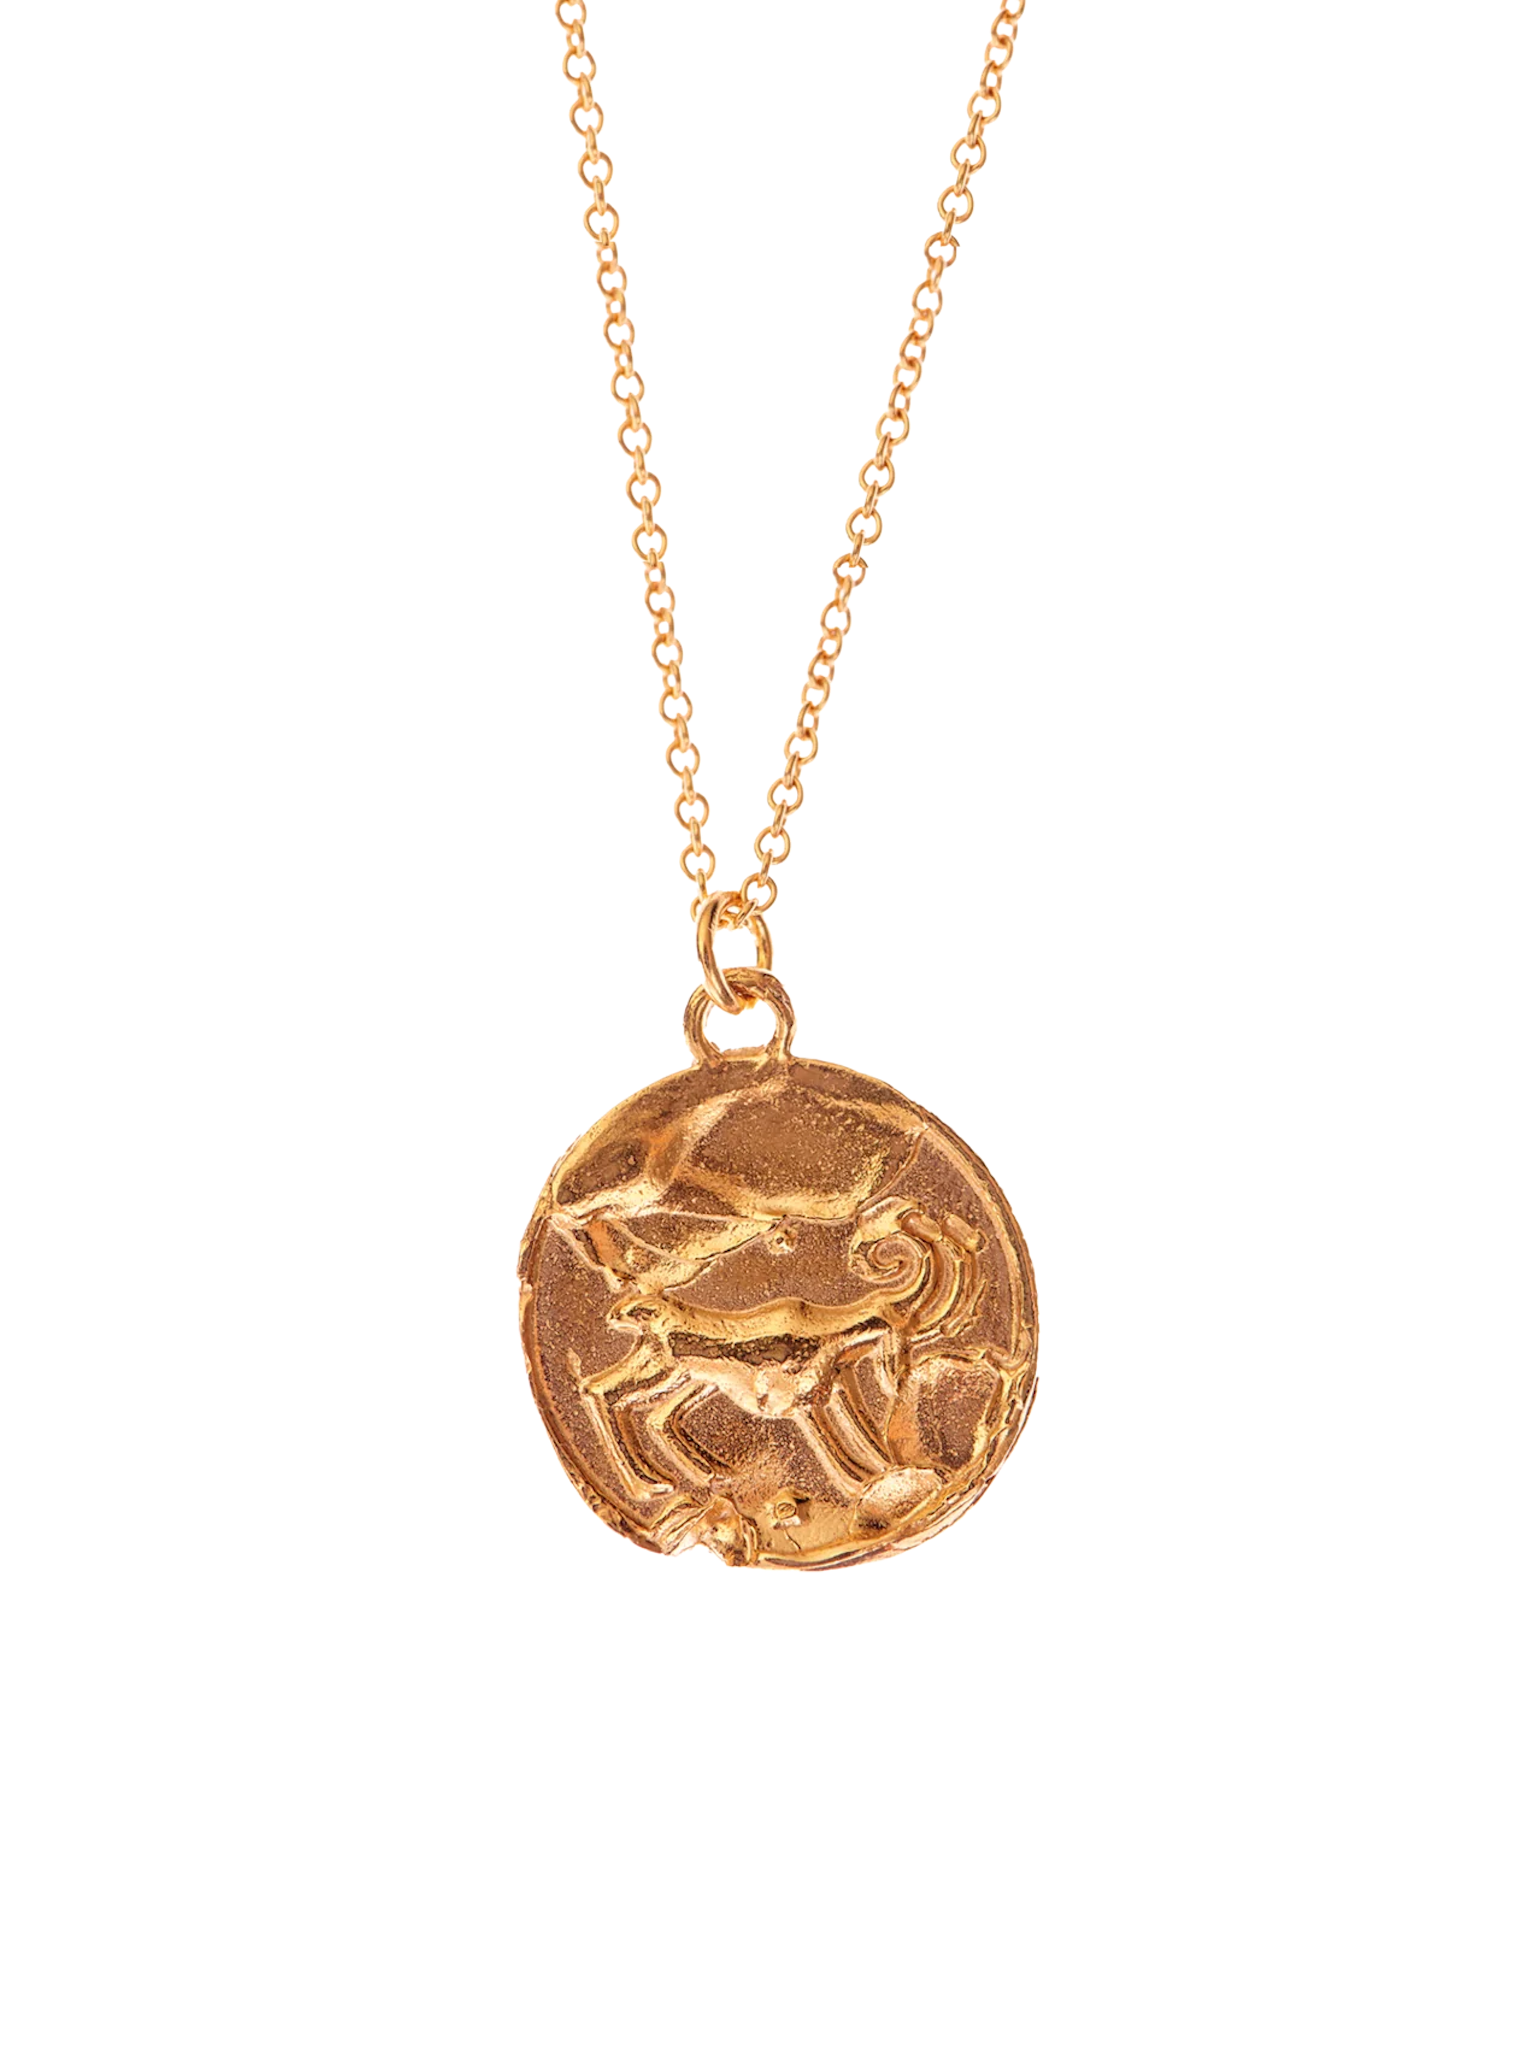 The aries medallion necklace